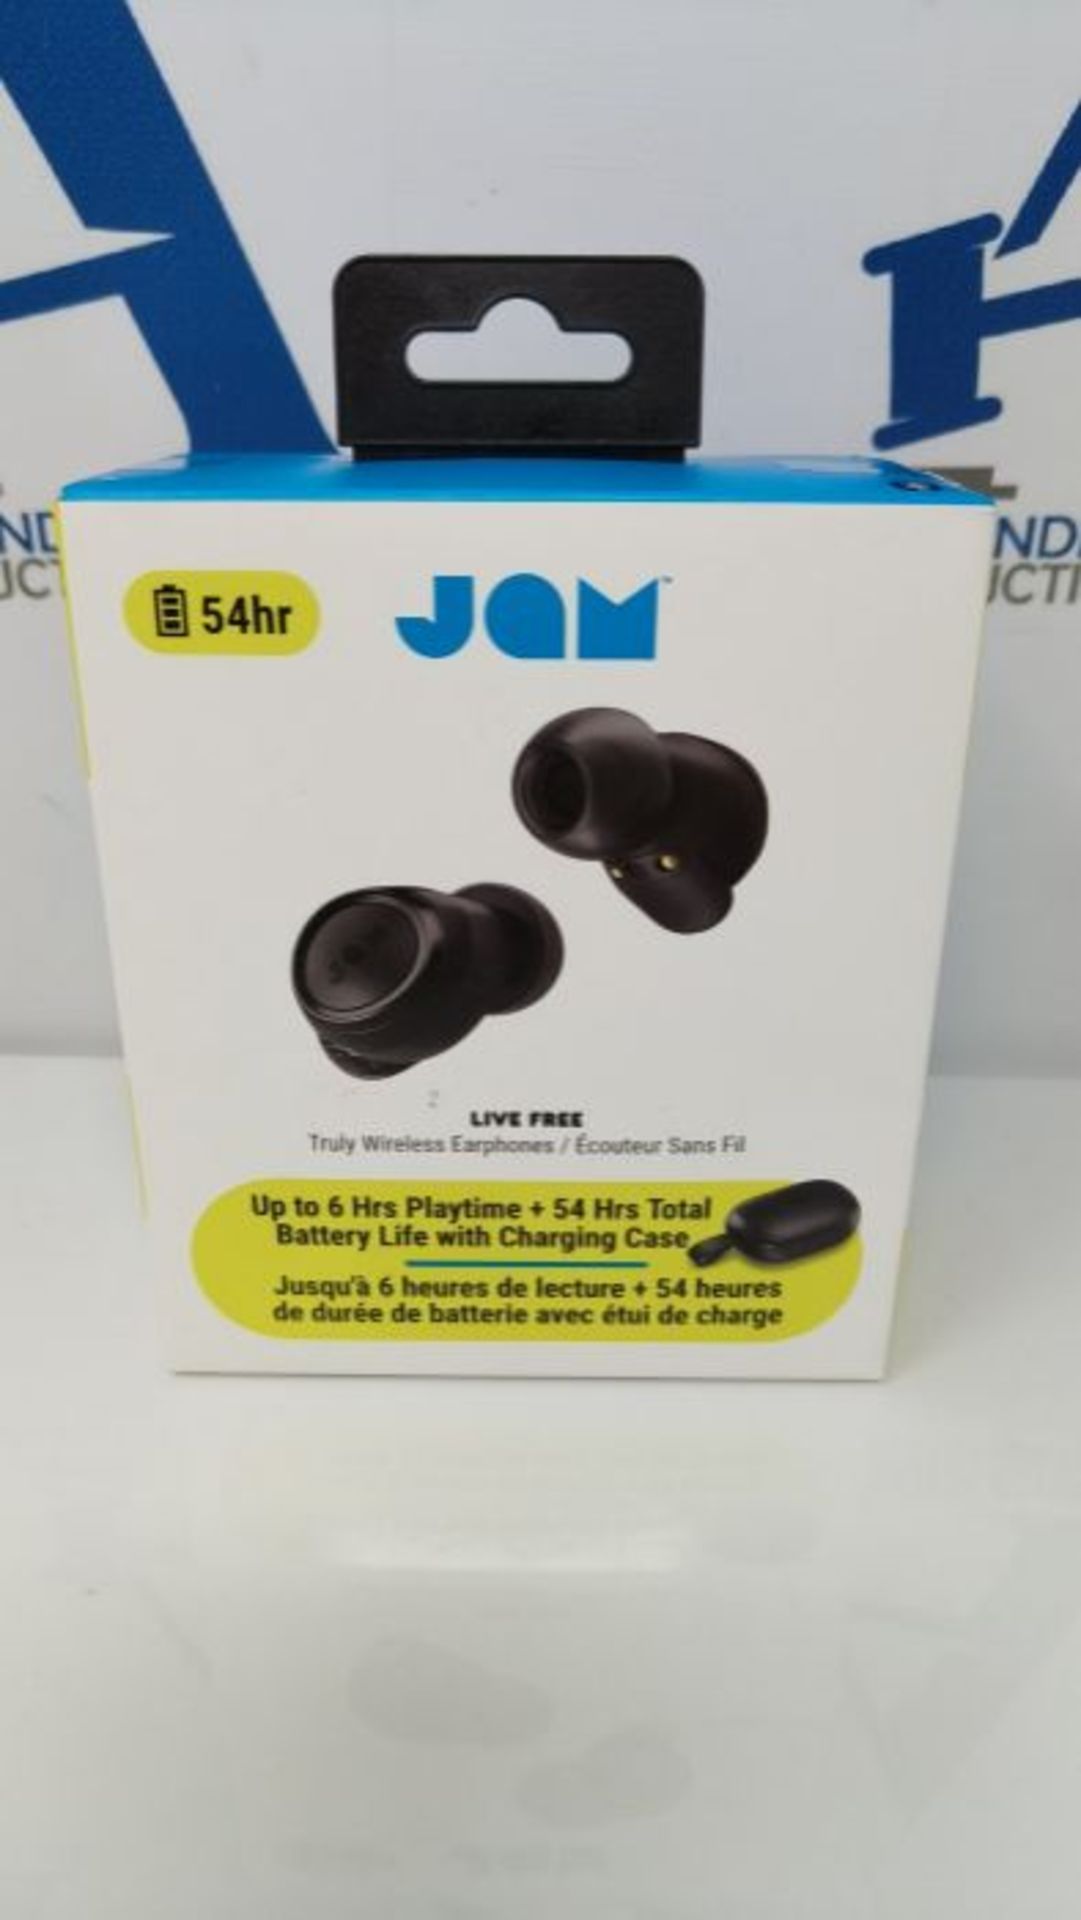 RRP £68.00 Jam Live Free TWS Earbuds - Wireless in-ear headphones with Bluetooth Connectivity, Up - Image 2 of 3